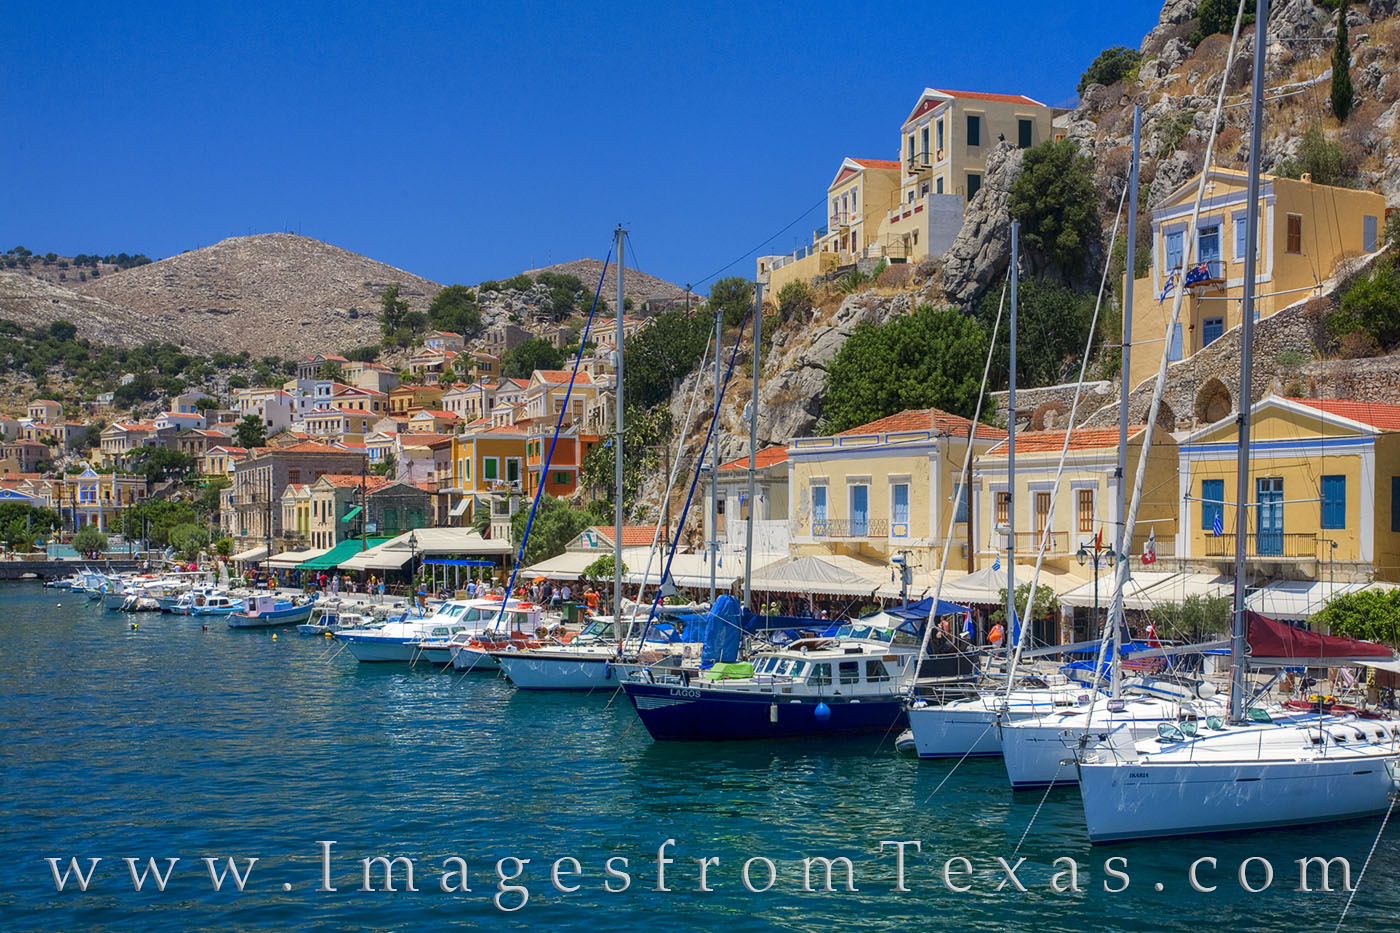 With a population under 3,000 people, the island of Symi is a quiet respite from the real world. Located in the Dodecanese island...